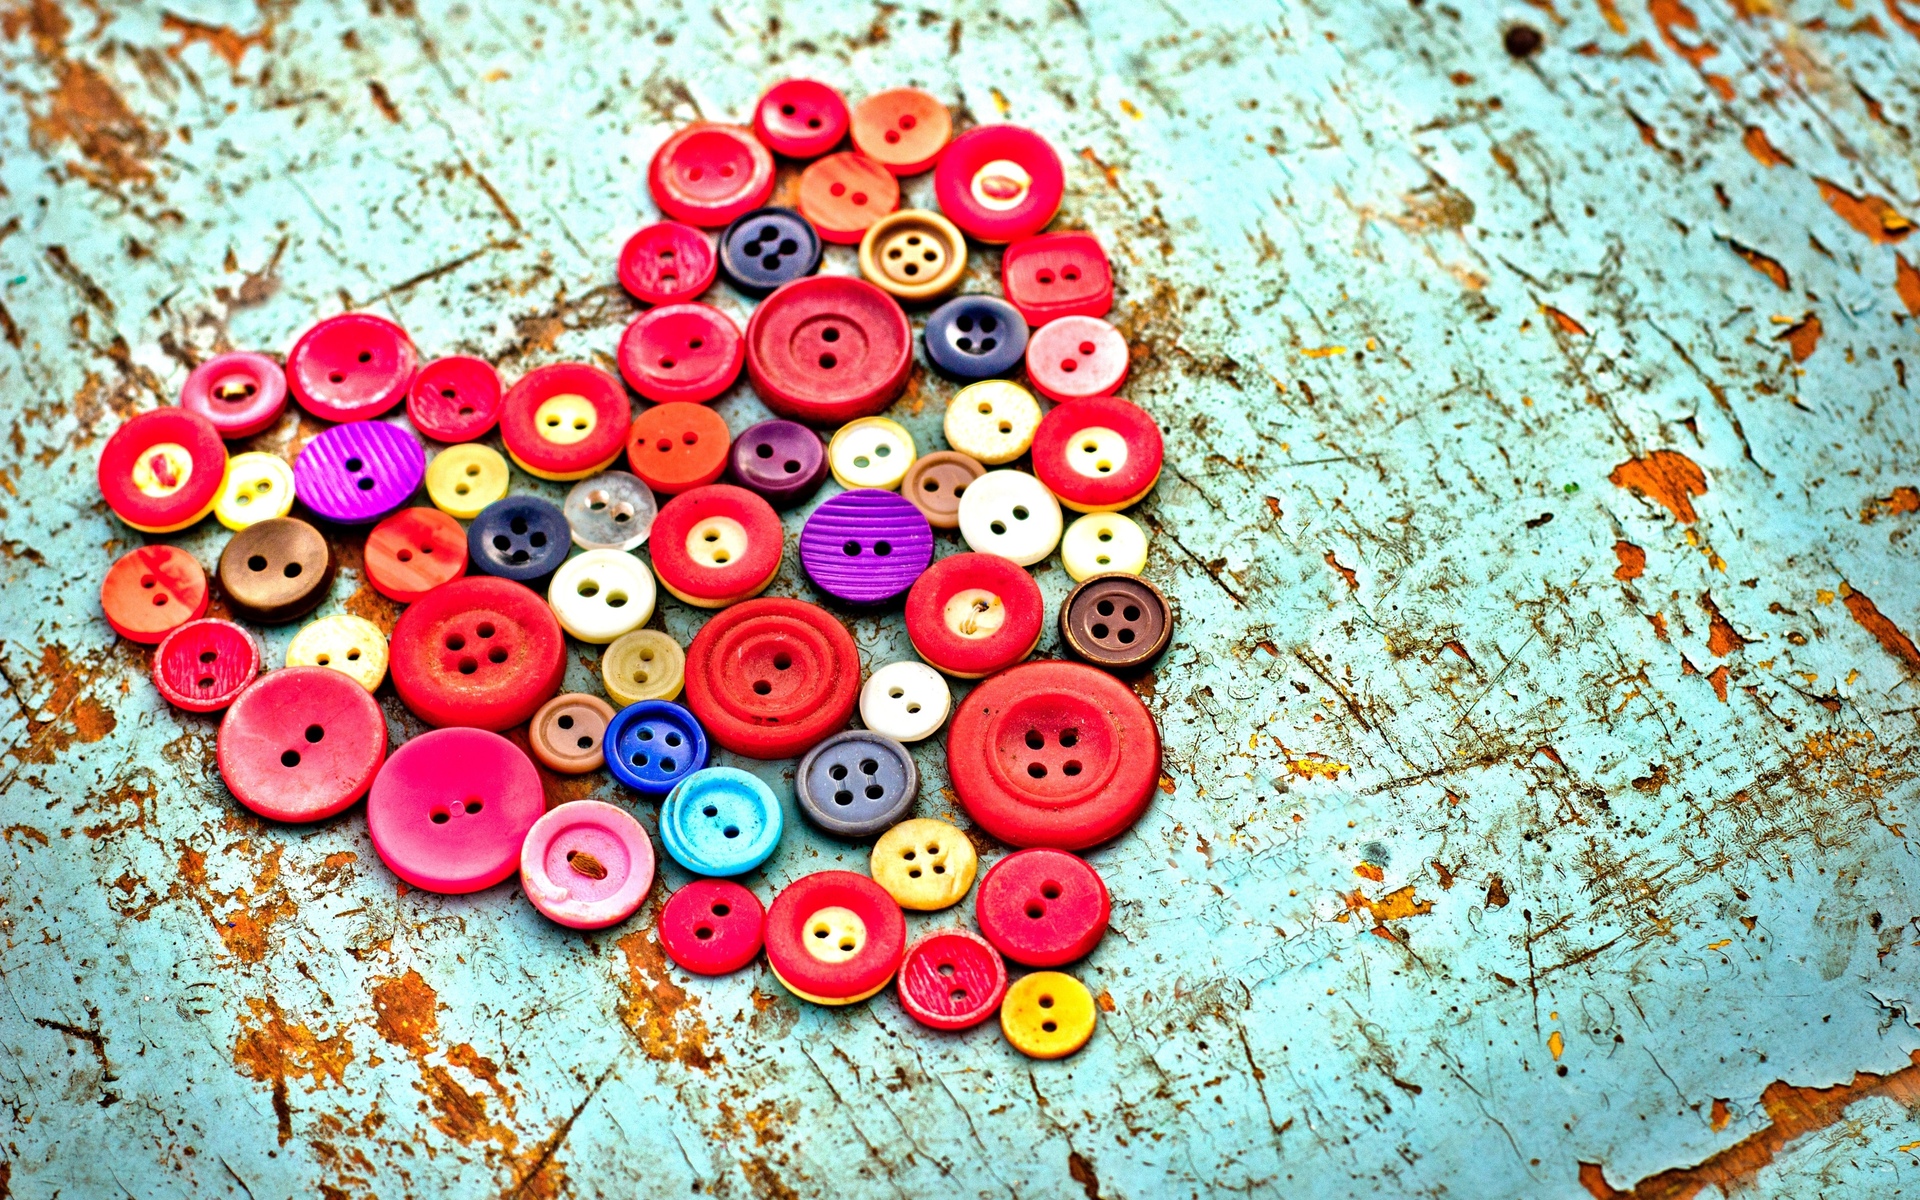 love, Romance, Heart, Artistic, Buttons, Color, Contrast, Emotion, Mood, Valentines, Abstract, Photography Wallpaper